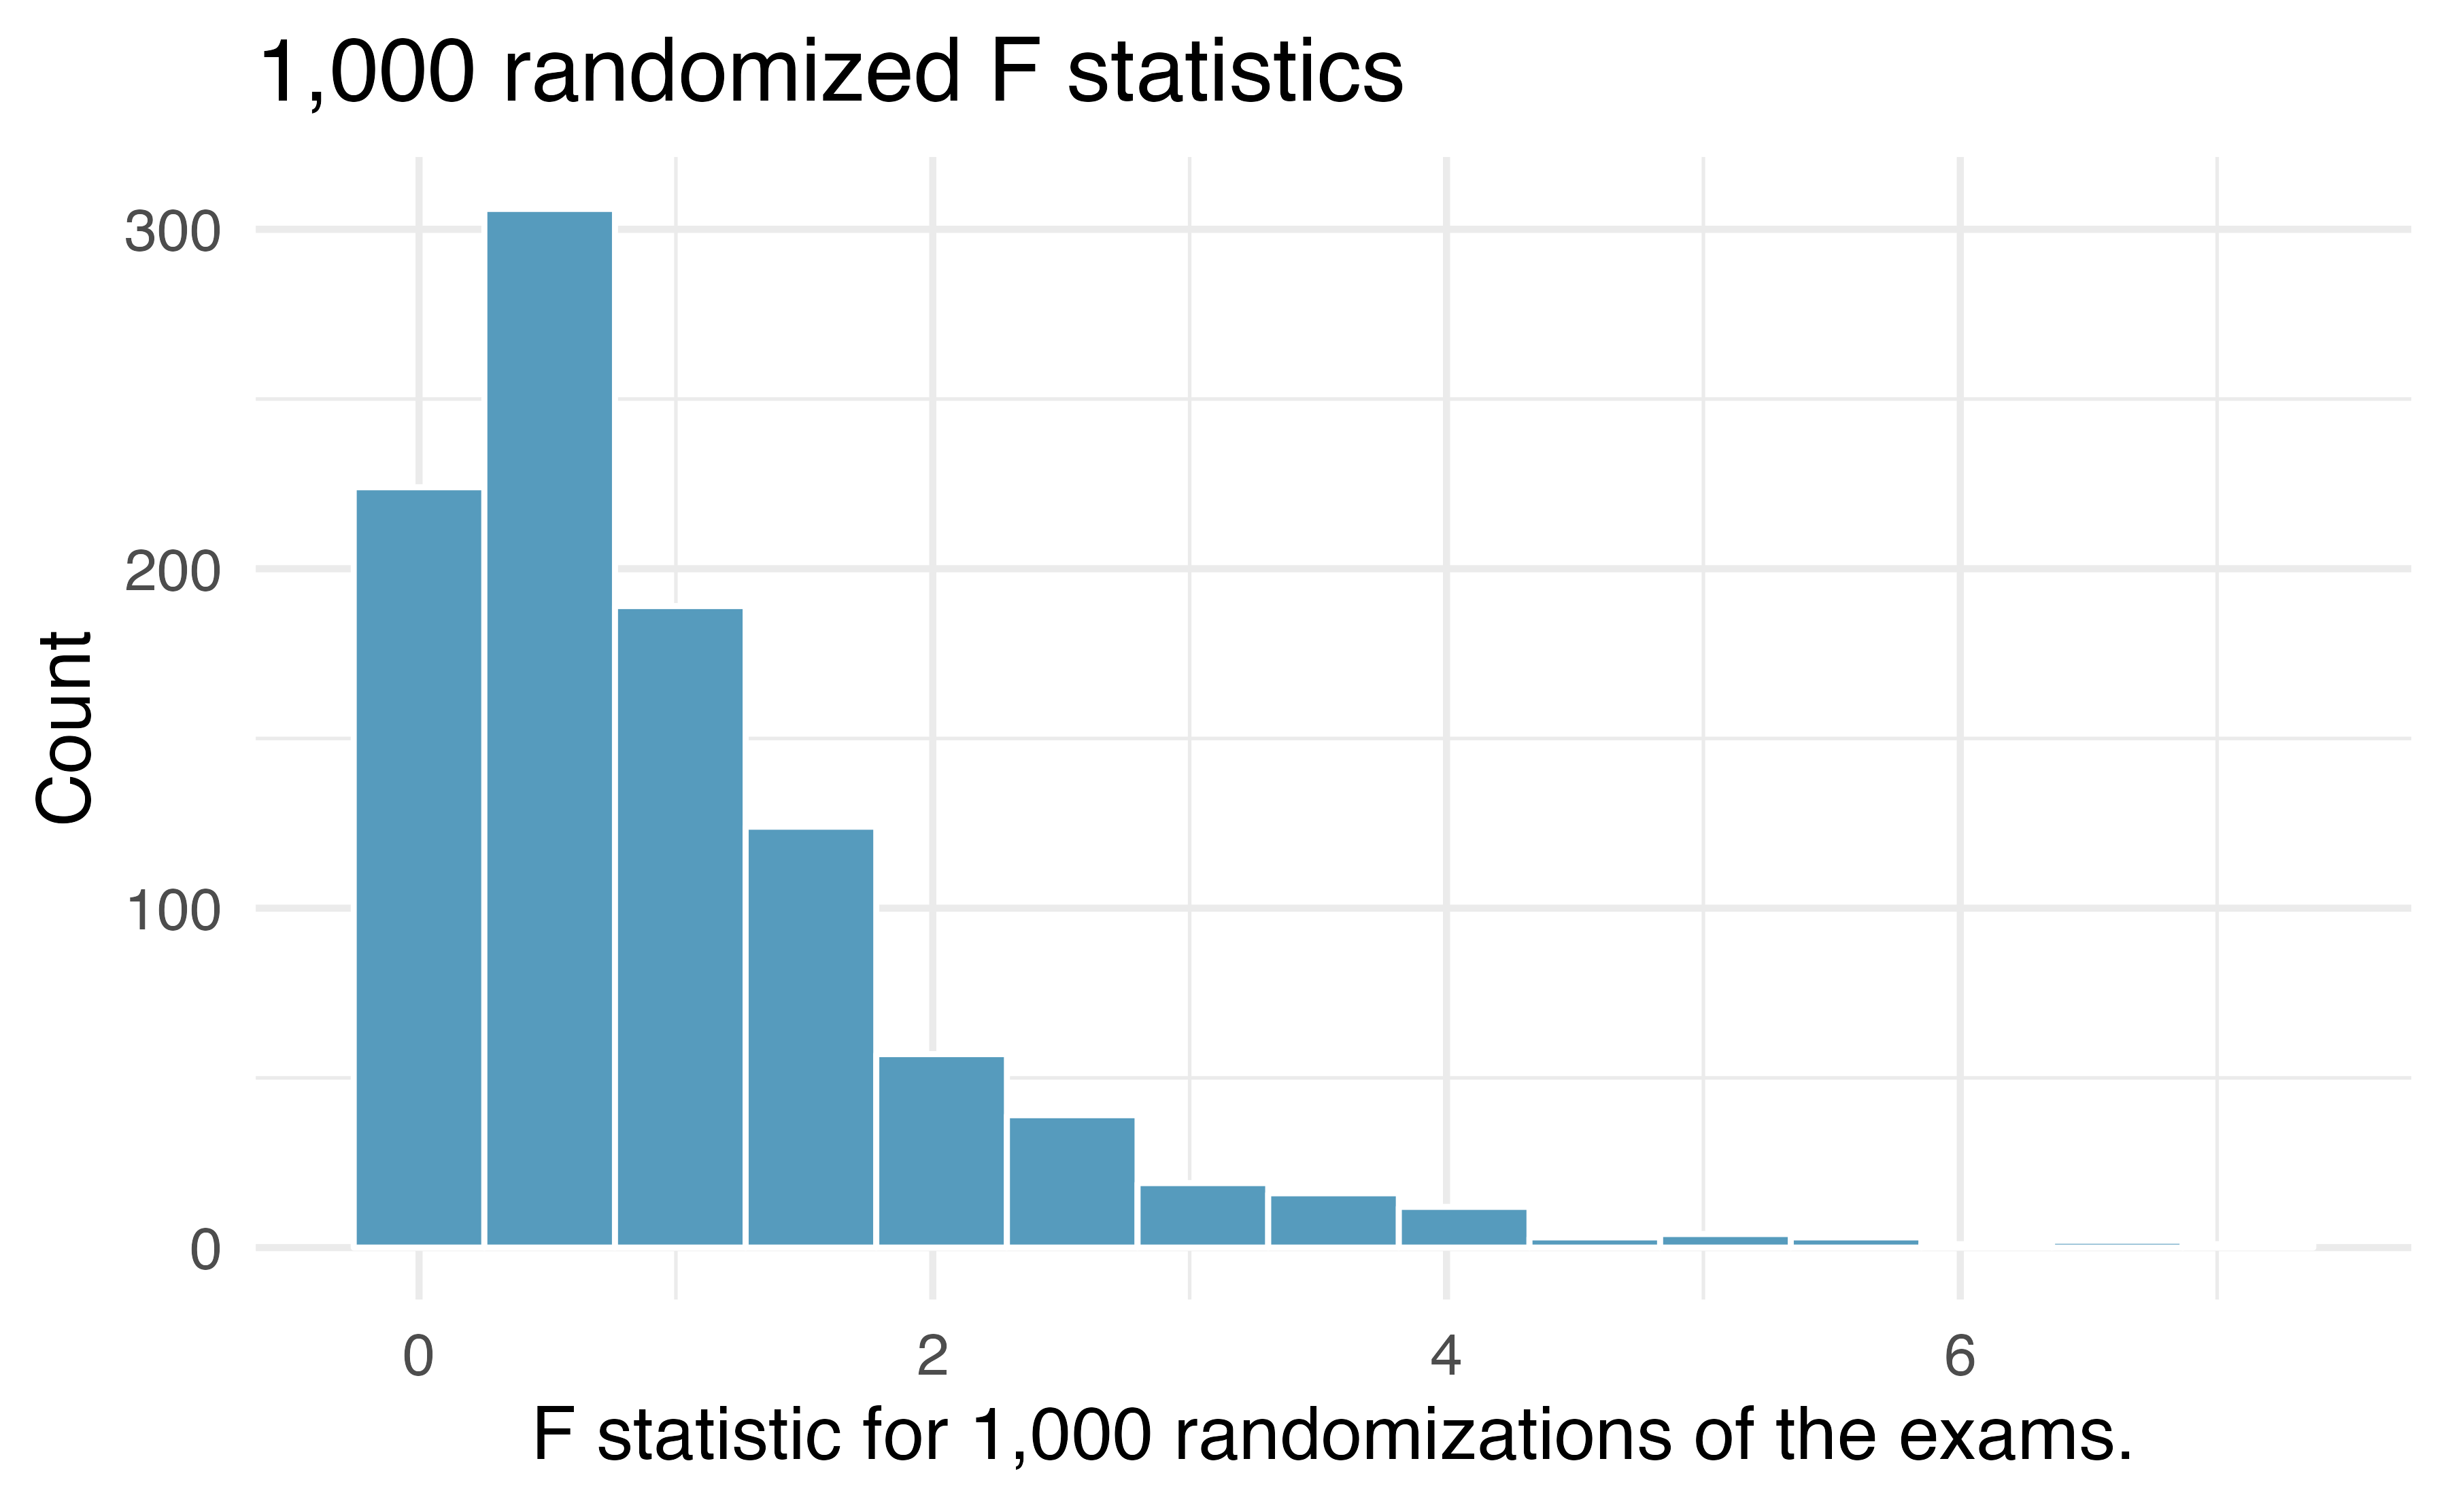 Histogram of F statistics calculated from 1,000 different randomizations of the exam type.